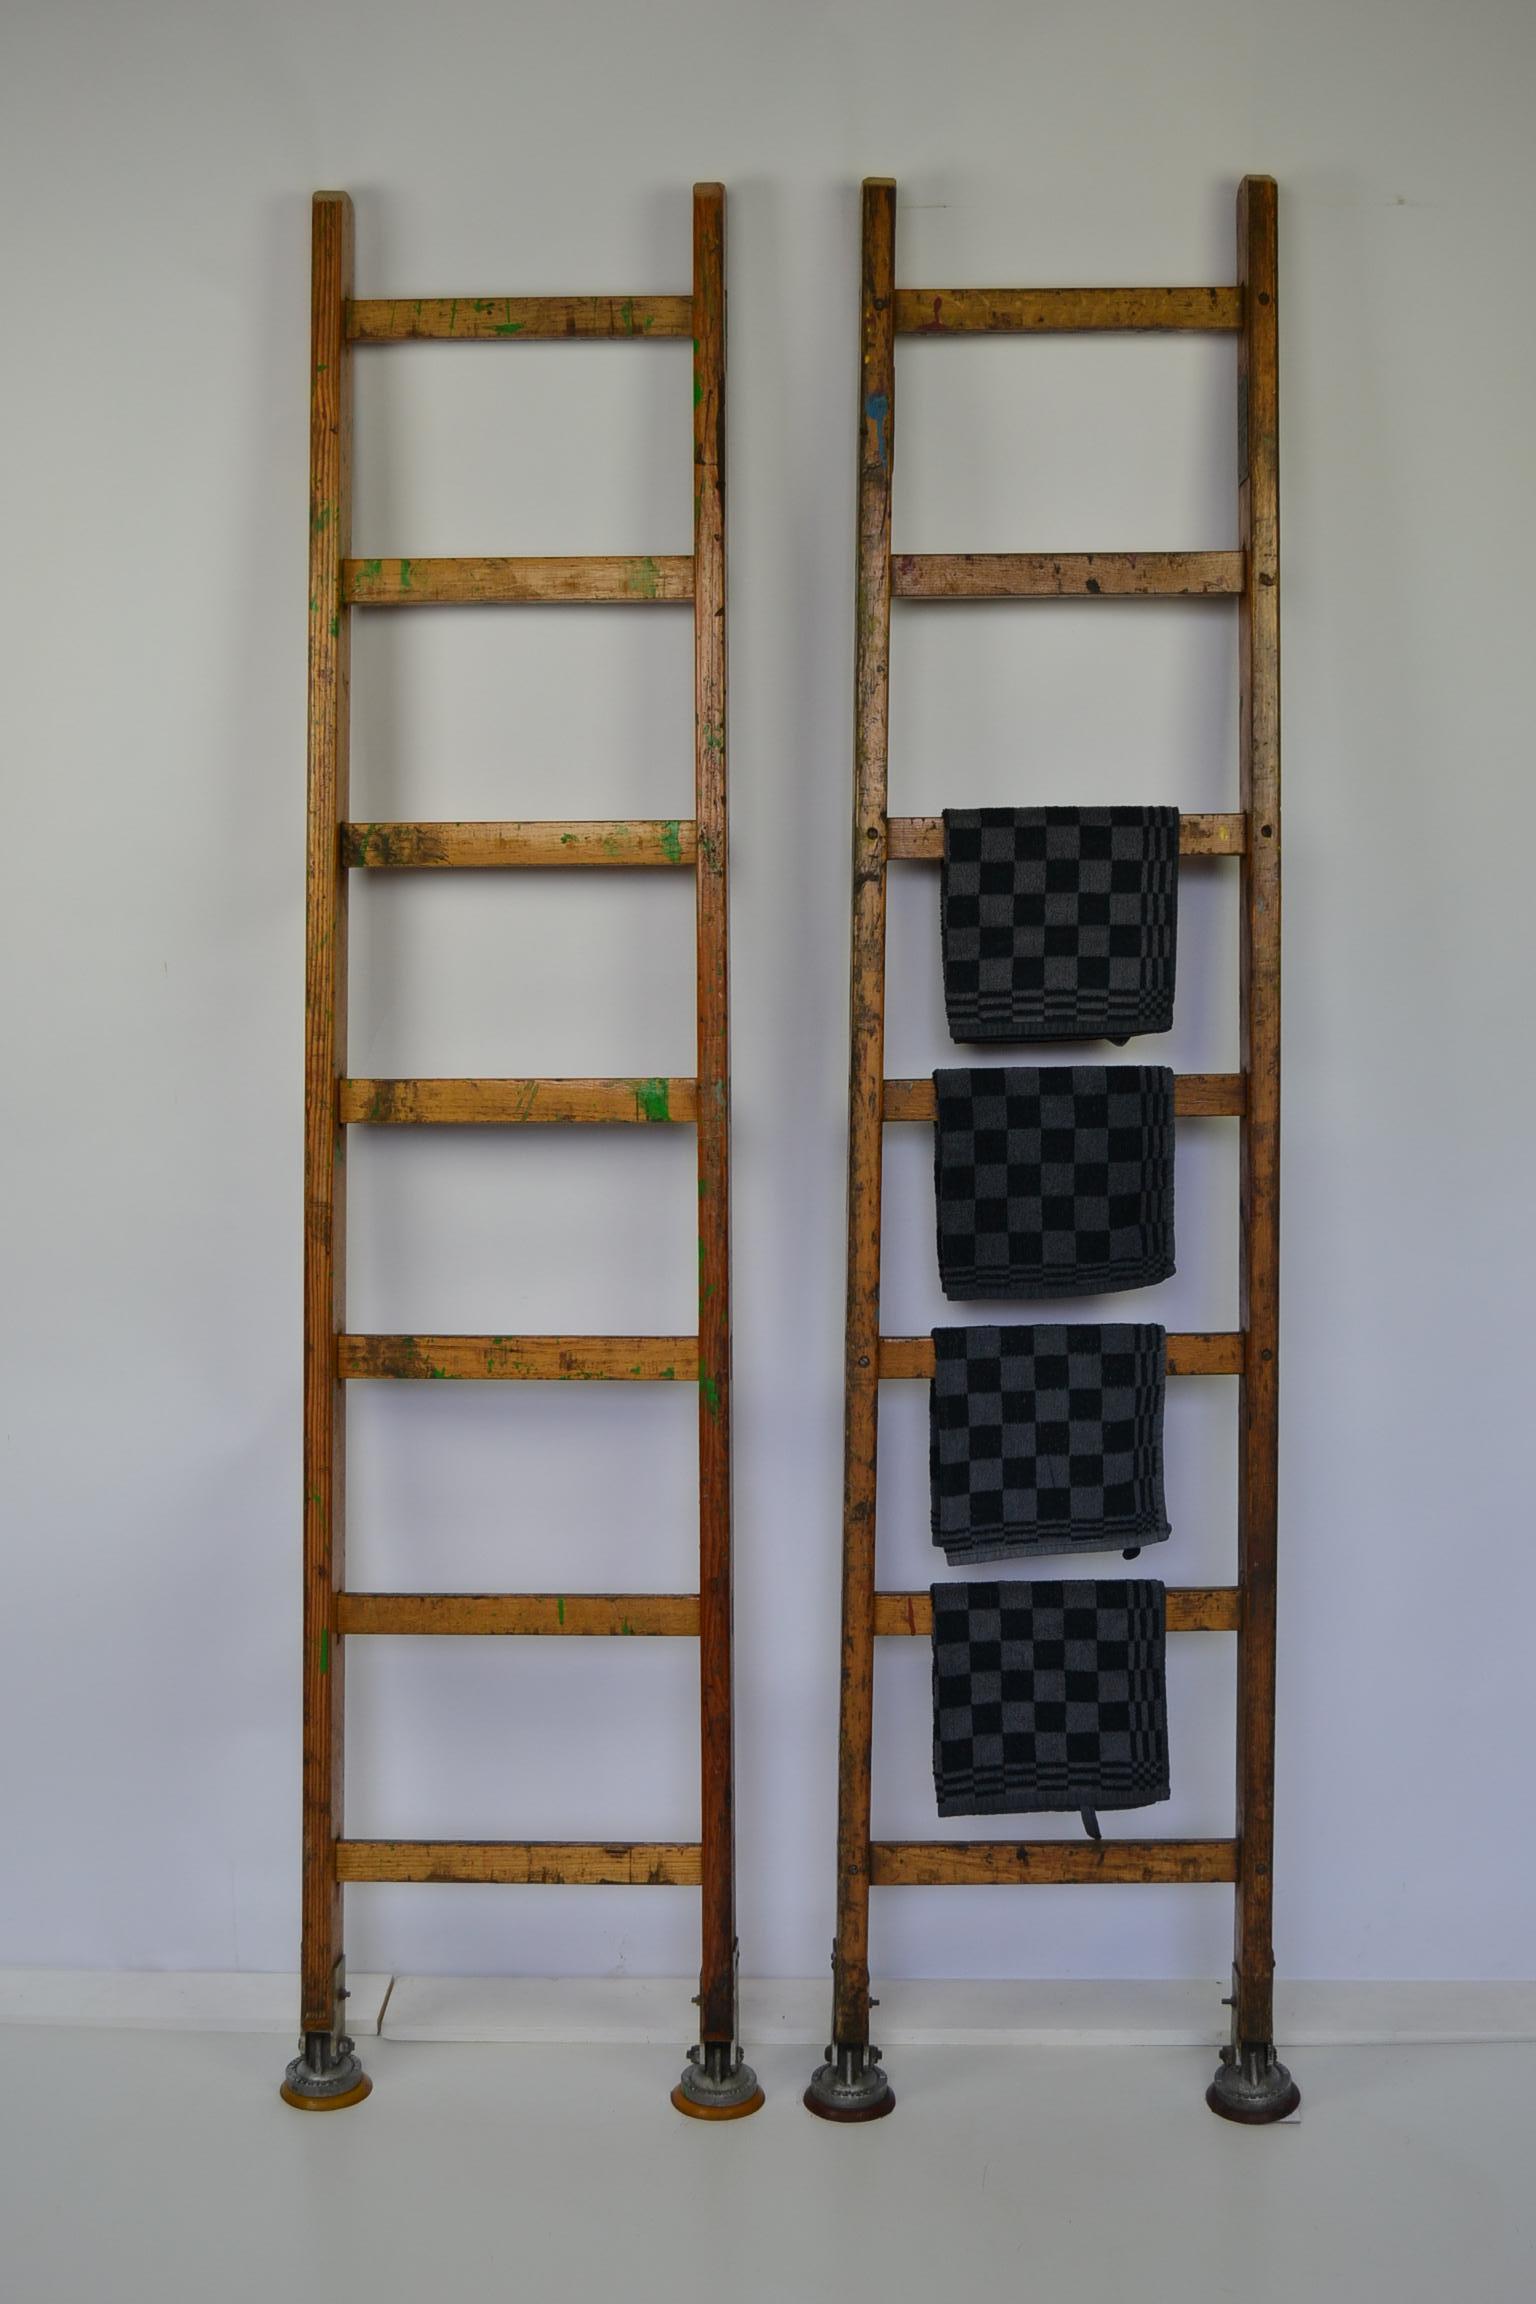 Great looking aged wooden ladders
made by the H.C Slingsby Ltd Company - London - UK.
This English Company is known for making trucks, ladders, barrows, castors ...
These old wooden ladders have cup rubber suction feet to place the ladder in the